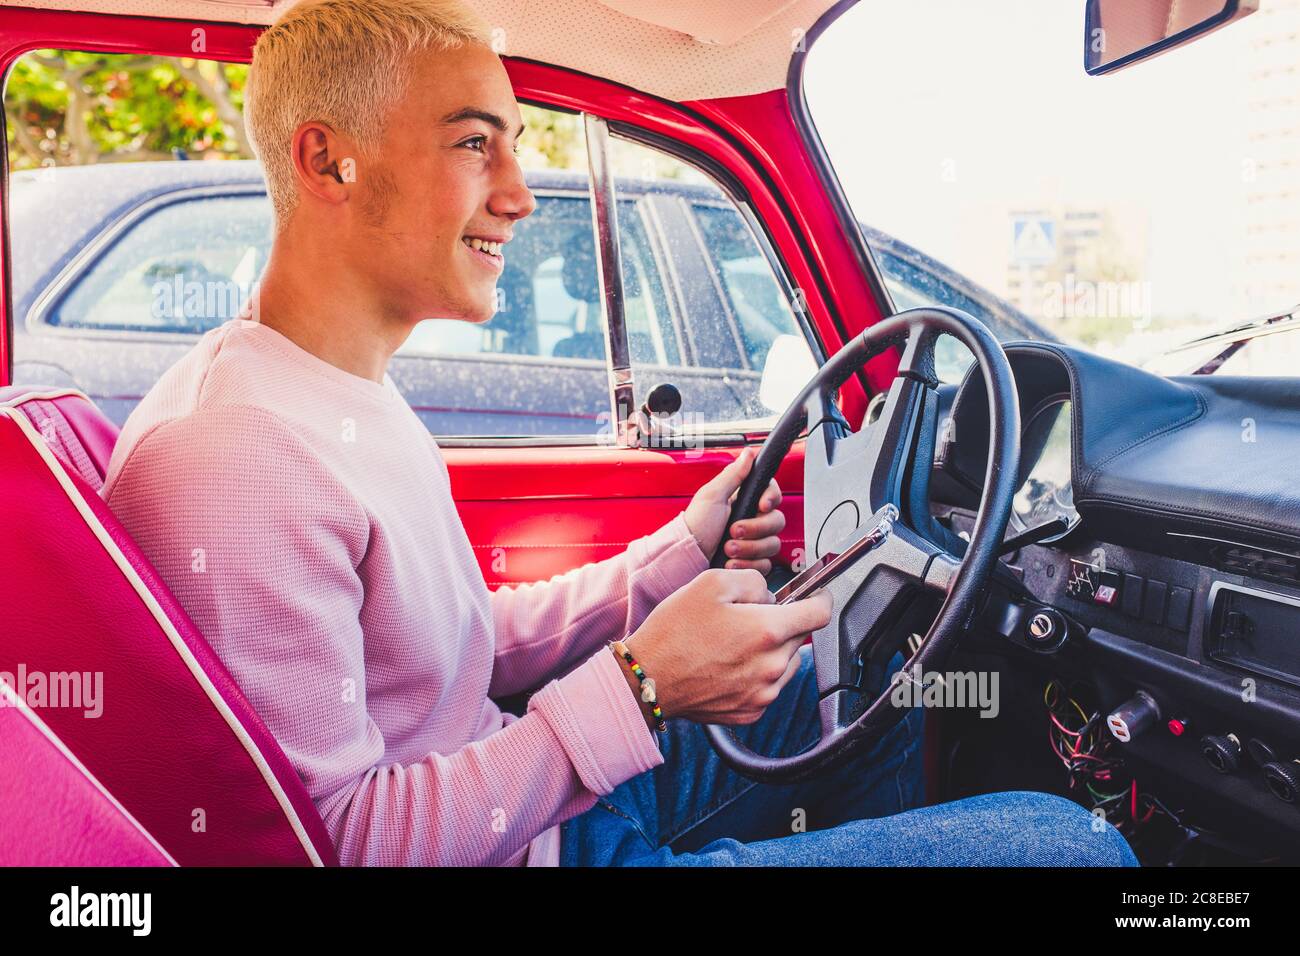 Smiling teenage boy sitting in vintage car with smartphone Stock Photo